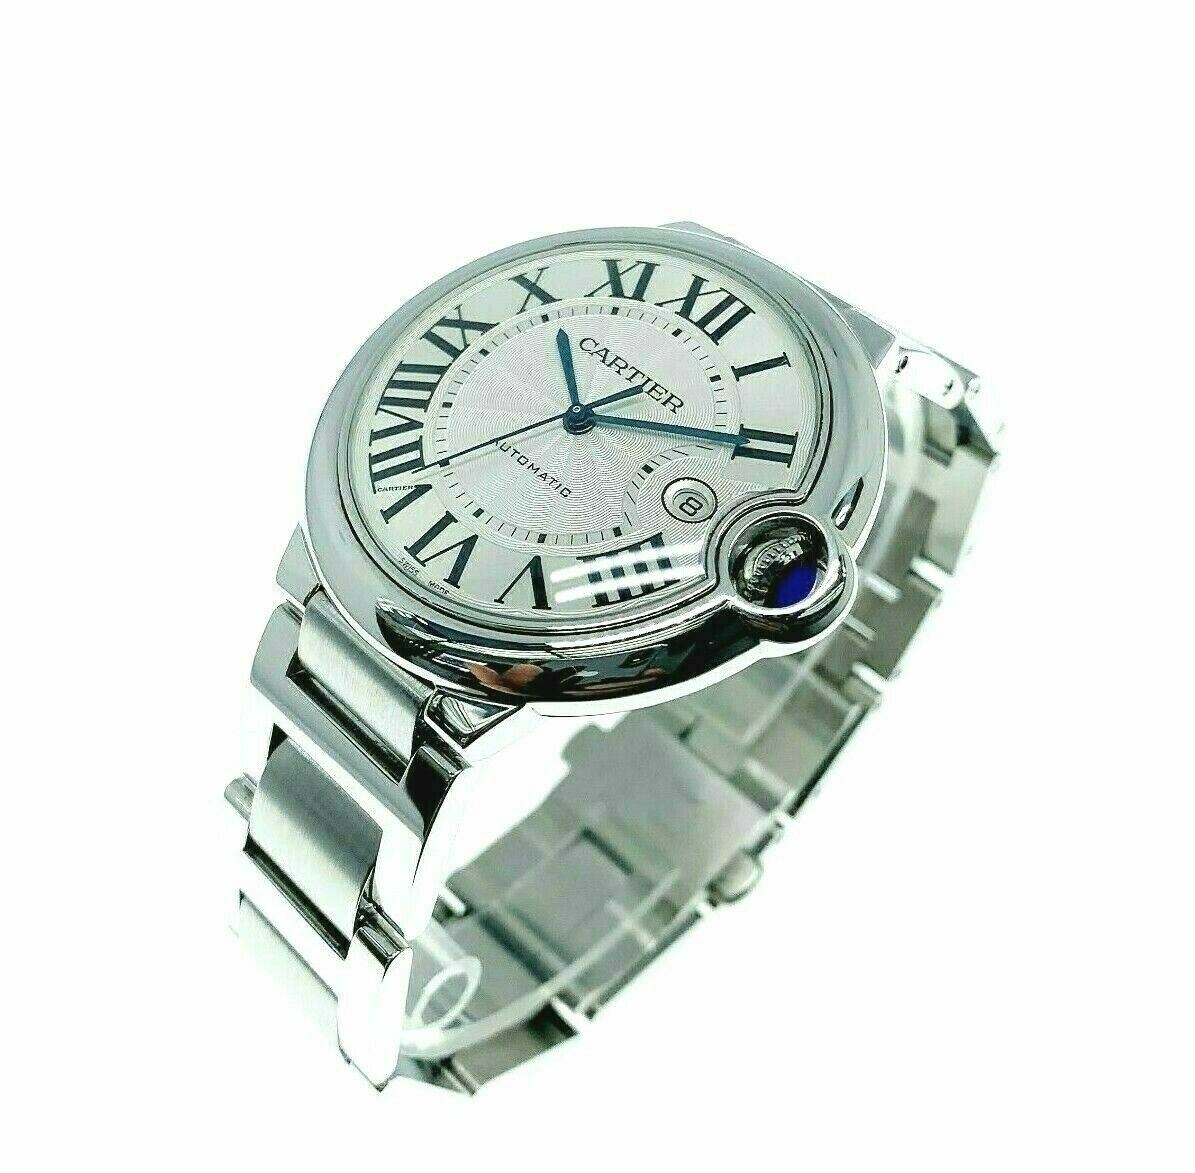 Cartier Ballon Bleu 42 MM Automatic Stainless Steel Watch Ref # 3001 with Box